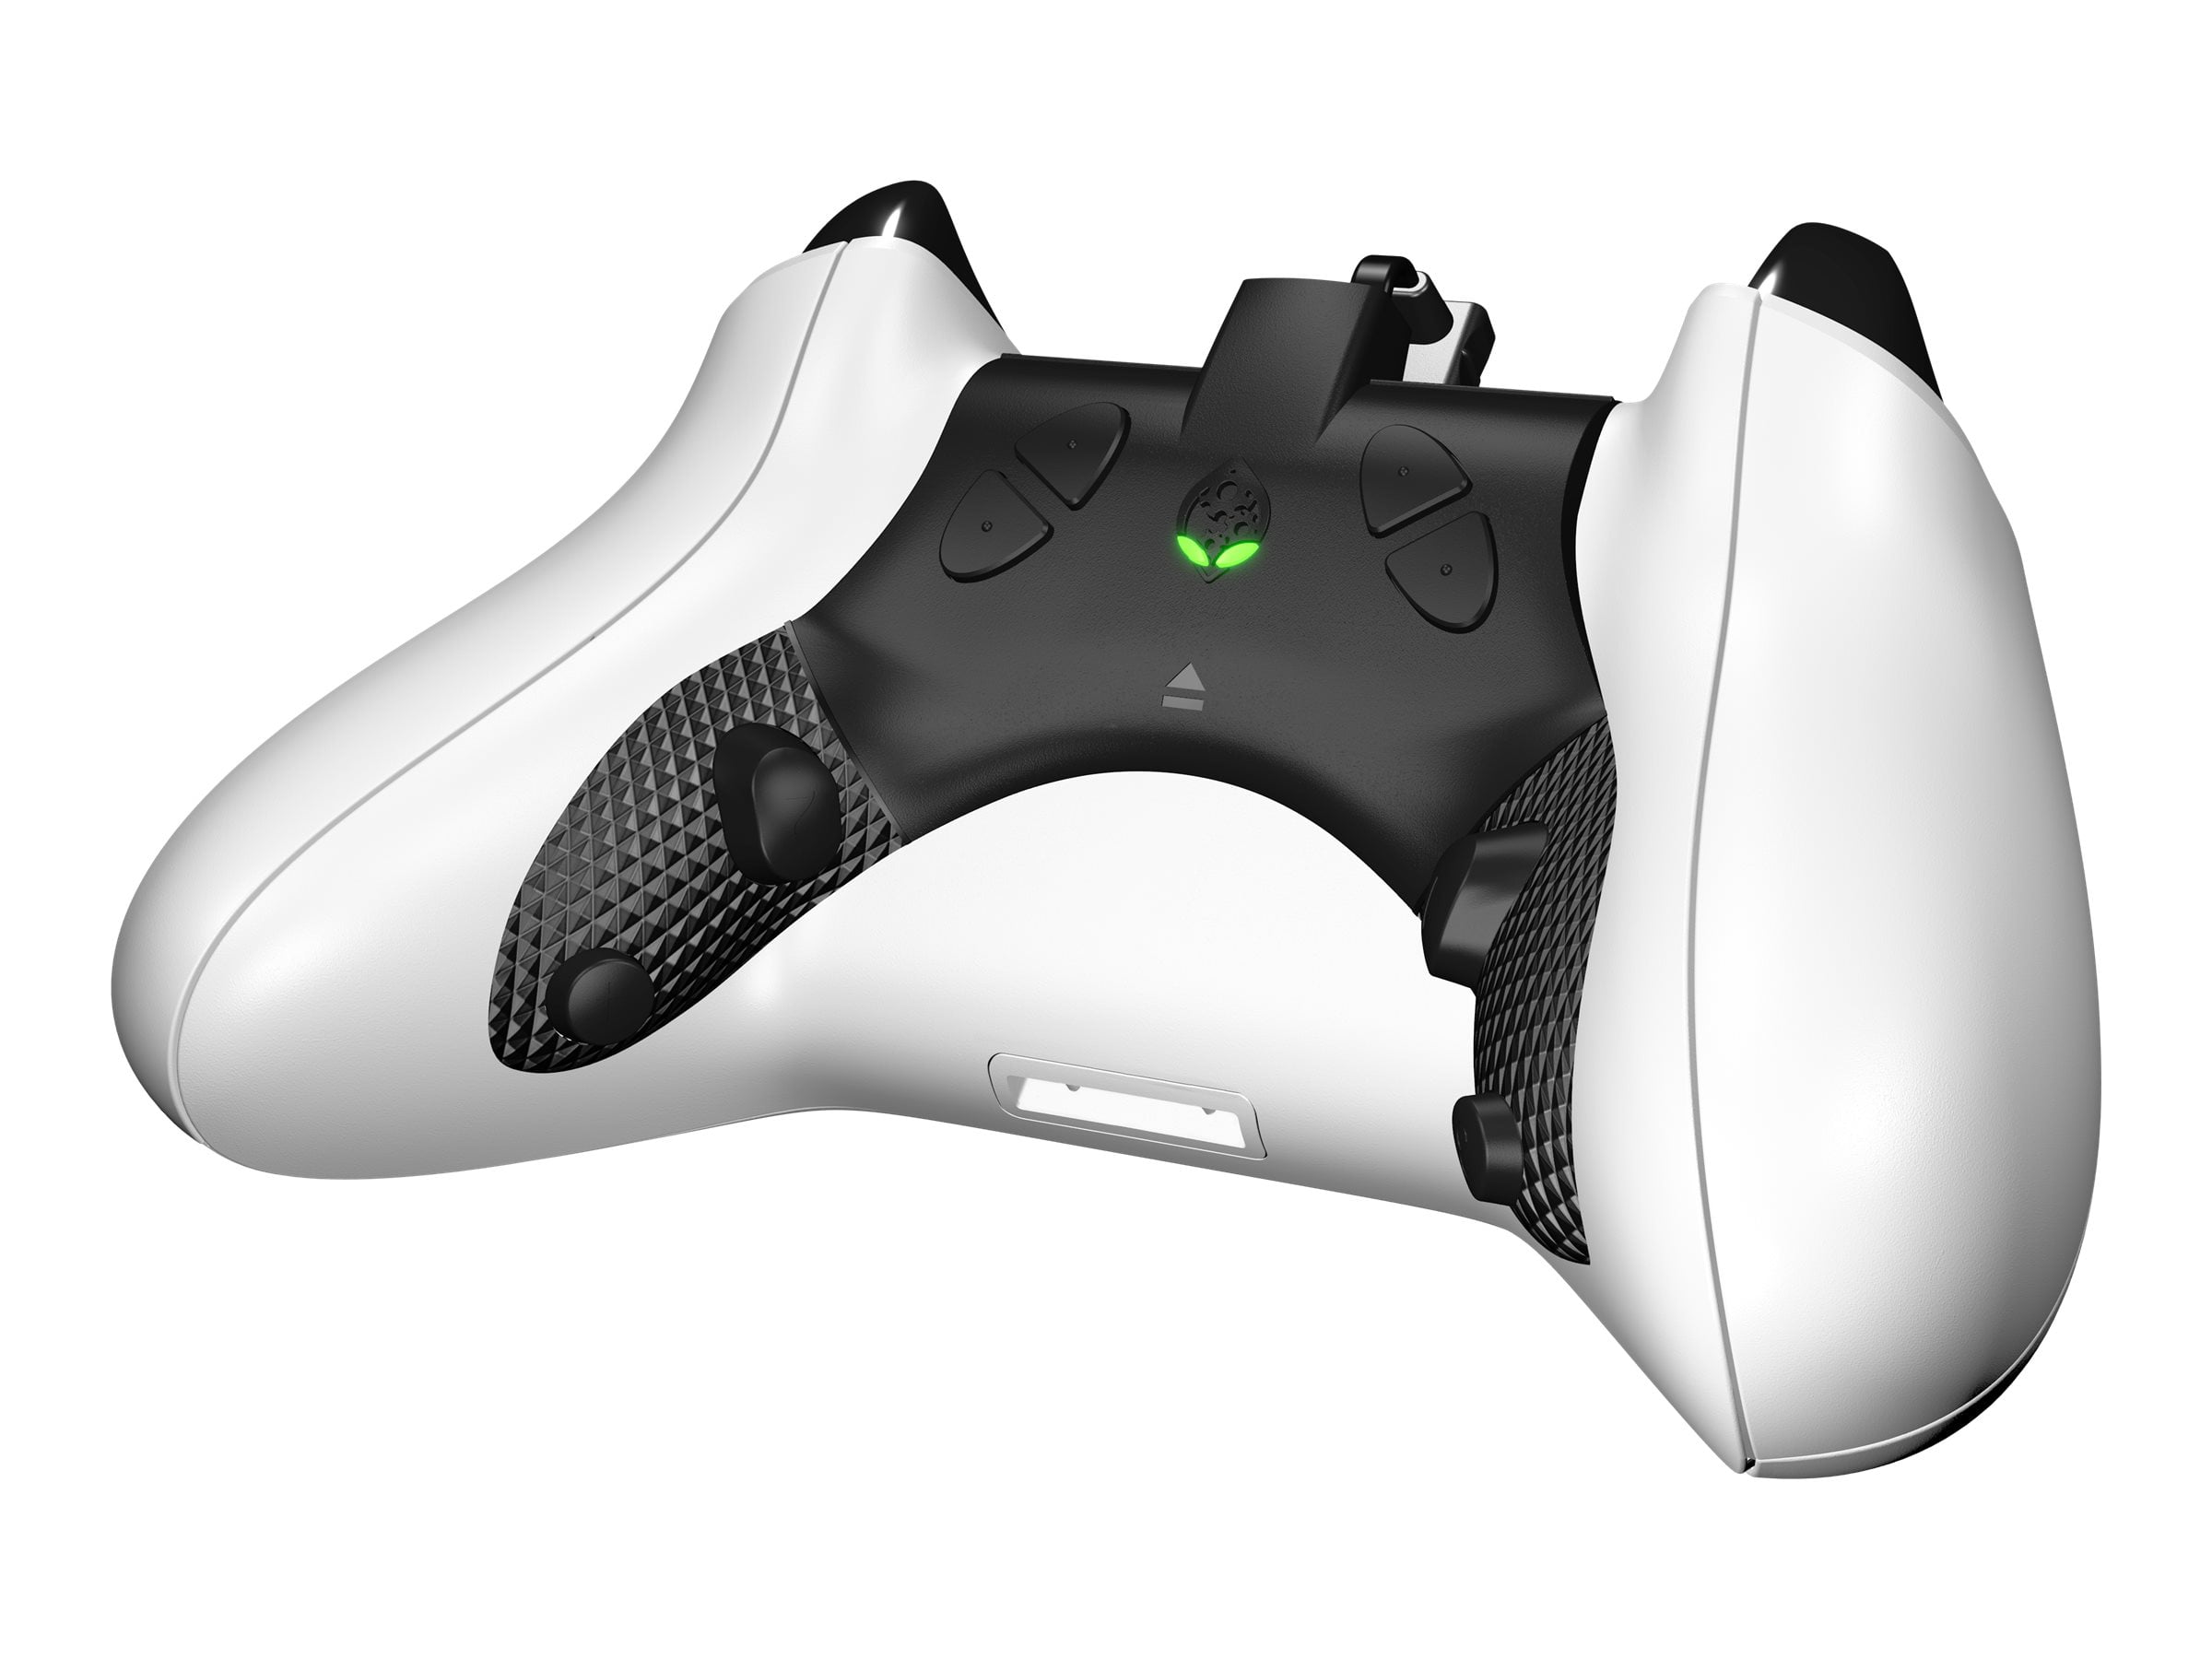 beest Oprichter Acquiesce Collective Minds STRIKEPACK Eliminator - Gamepad attachment for game  controller - for Microsoft Xbox One Wireless Controller - Walmart.com